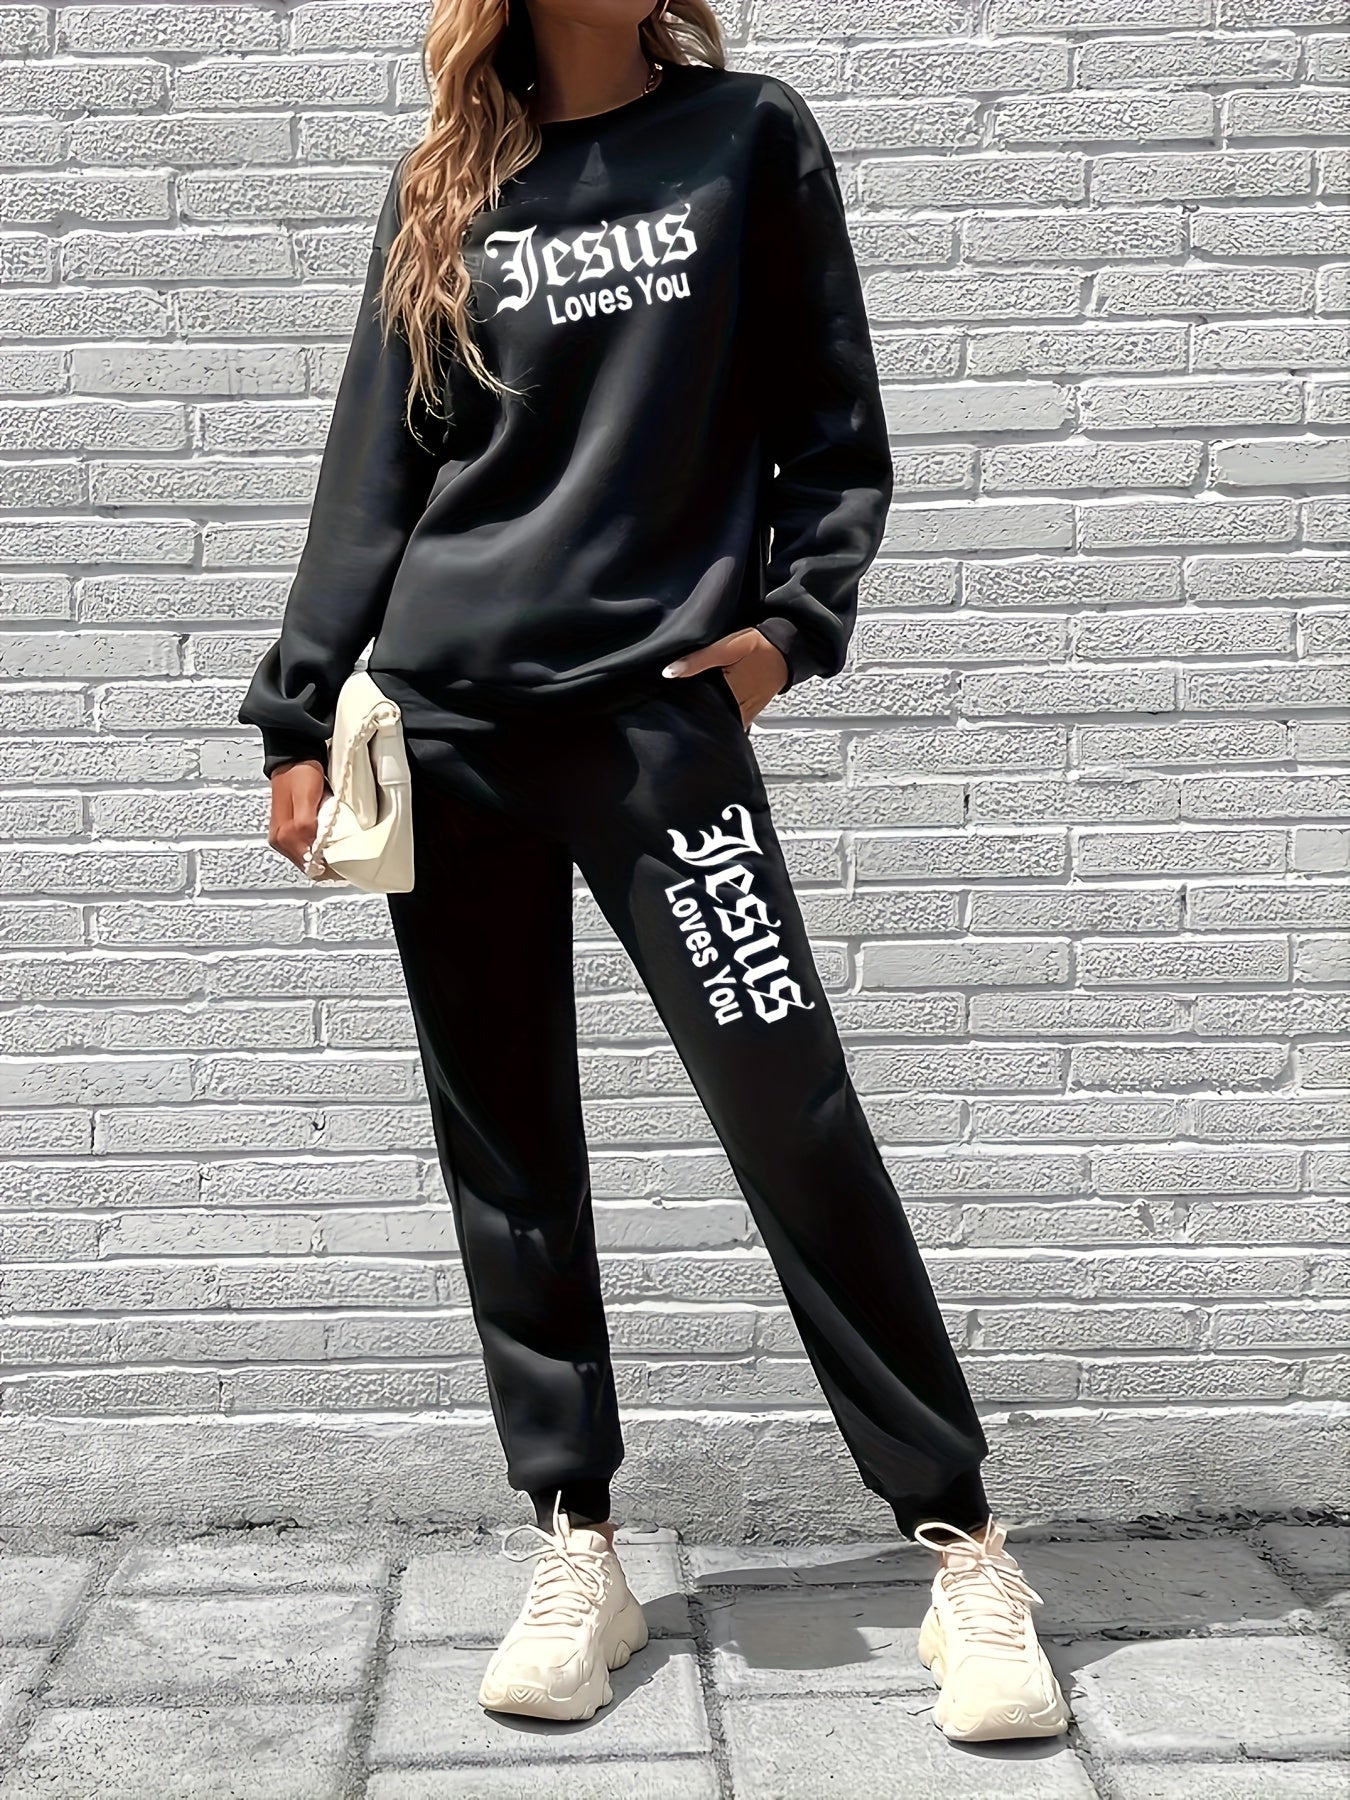 Jesus Loves You Women's Christian Casual Outfit claimedbygoddesigns